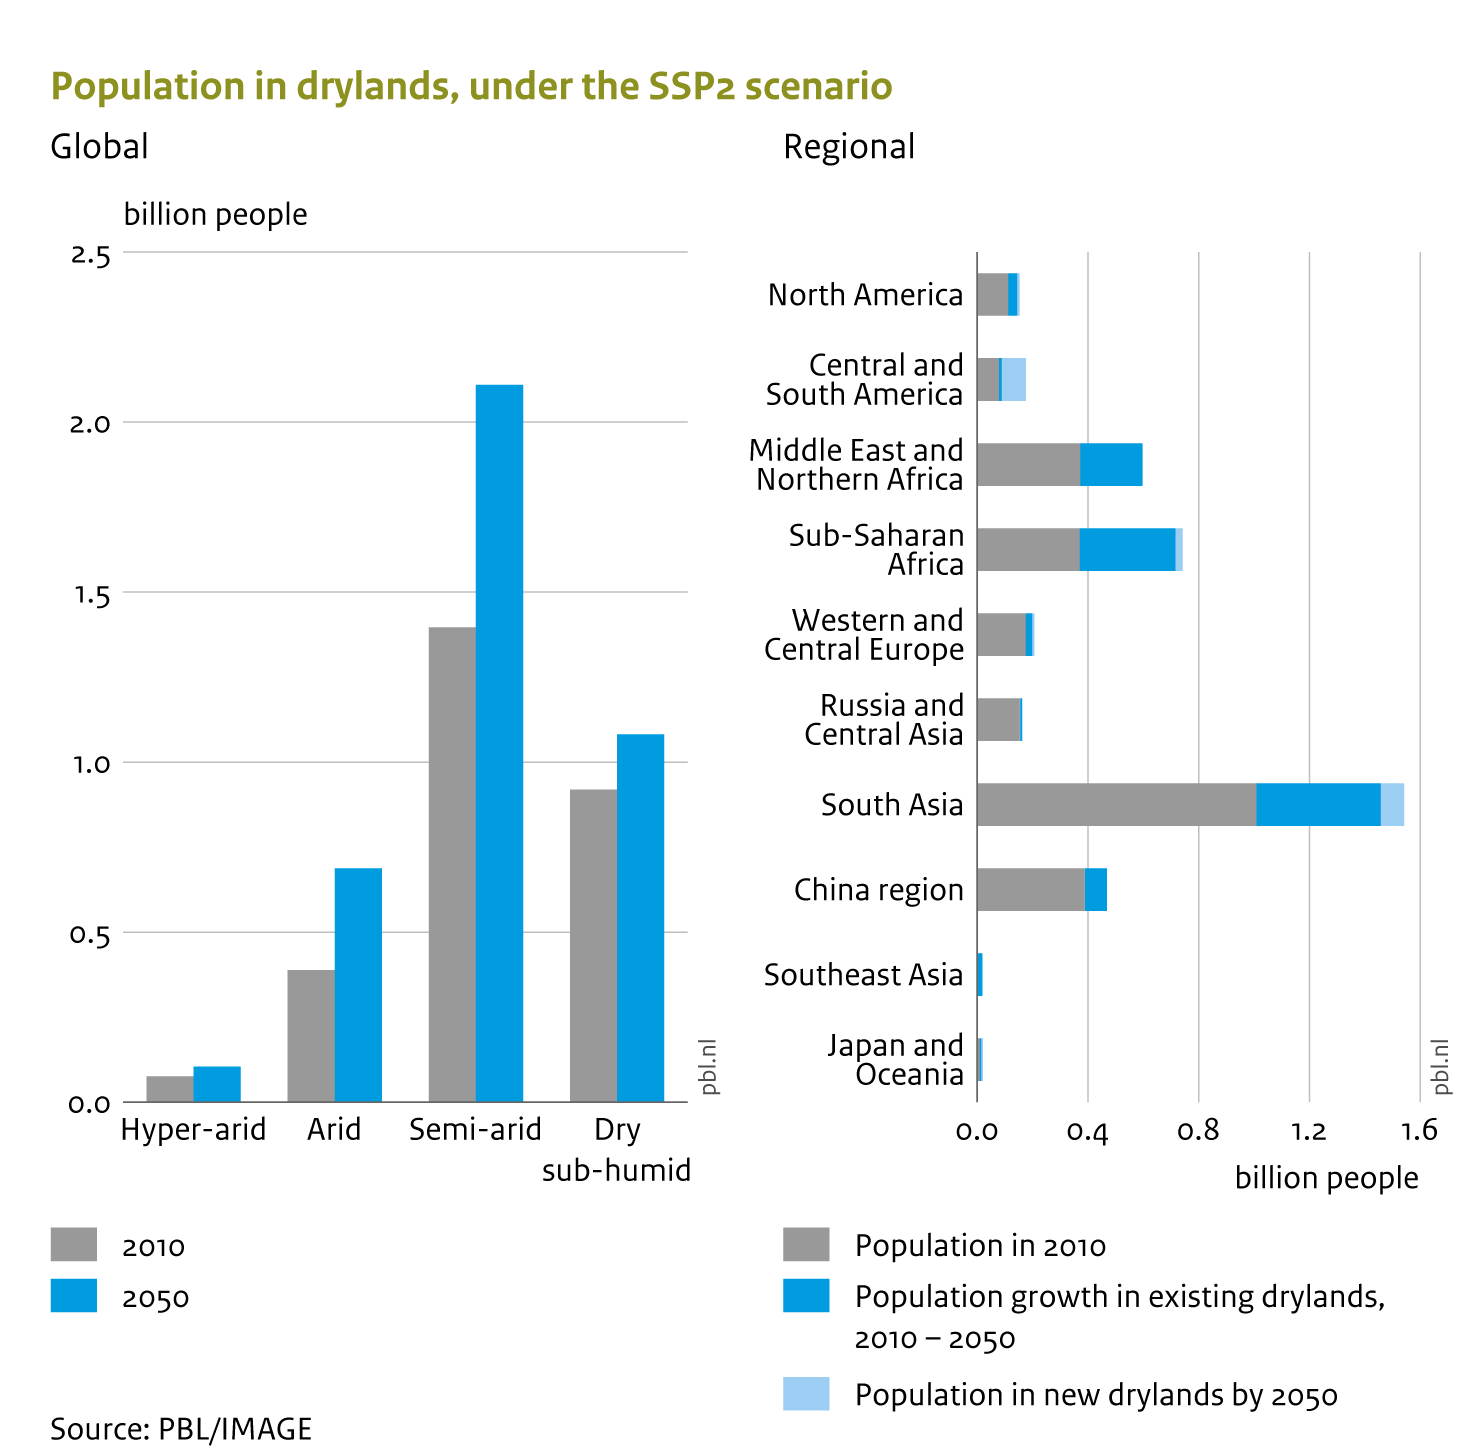 Drylands populations are projected to increase considerably by 2050Human populations in drylands are projected to increase by 40% to 50%, from 2.7 billion in 2010 to around 4.0 billion by 2050. This is a much more rapid increase than the 25% in non-drylands. South Asia is projected to see the largest increase in number of people living in drylands, over 500 million, and Sub-Saharan Africa is estimated to see its dryland population almost doubling.In this scenario, most of this change is driven by population growth in existing drylands and not as much by drylands expanding due to climate change.